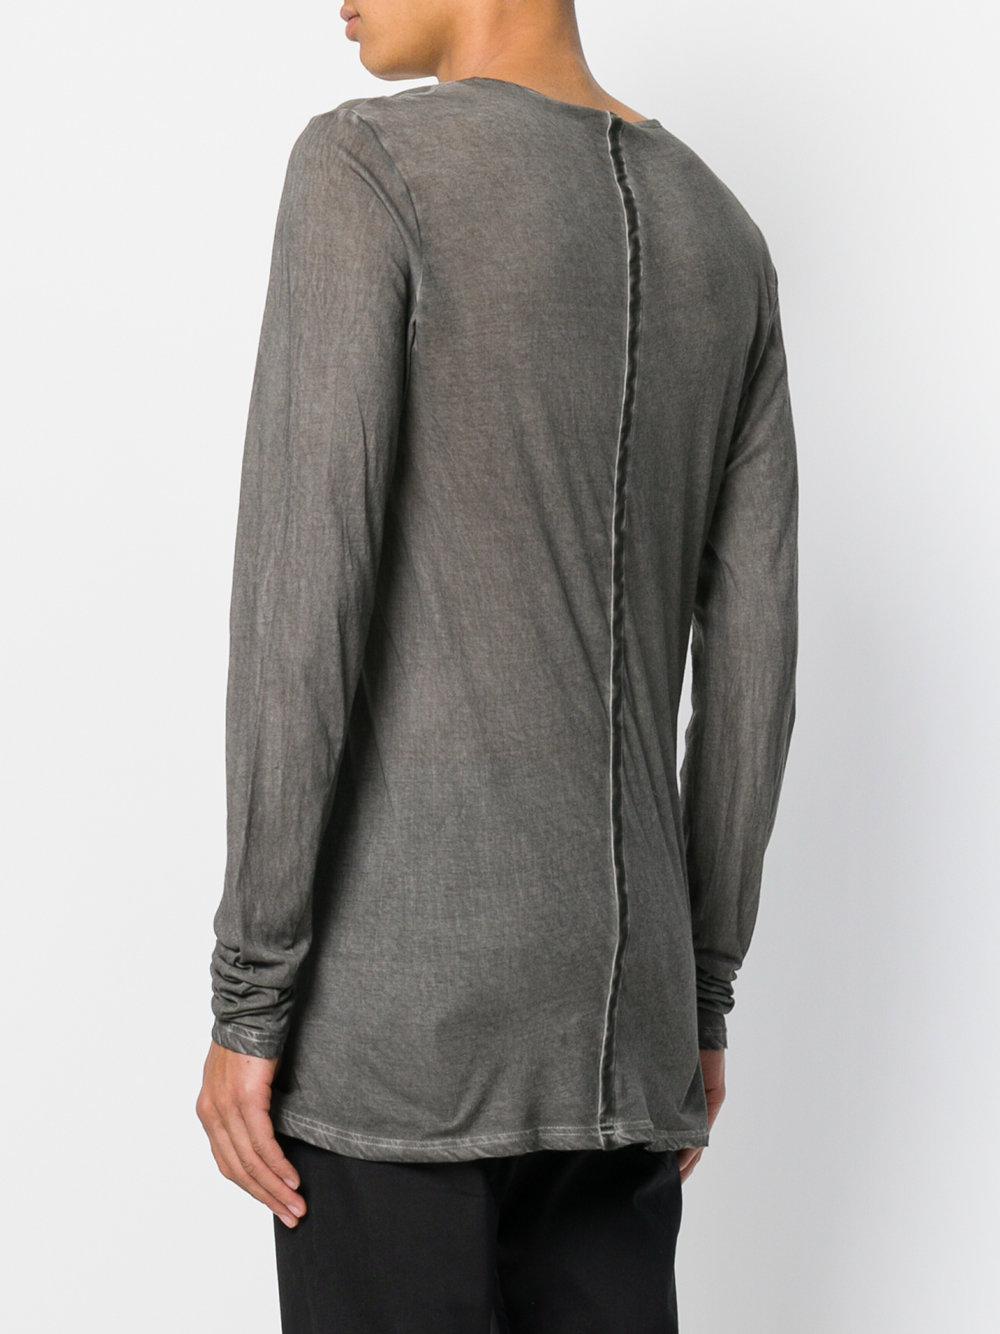 Lyst - Unconditional Silk Contrast T-shirt in Gray for Men